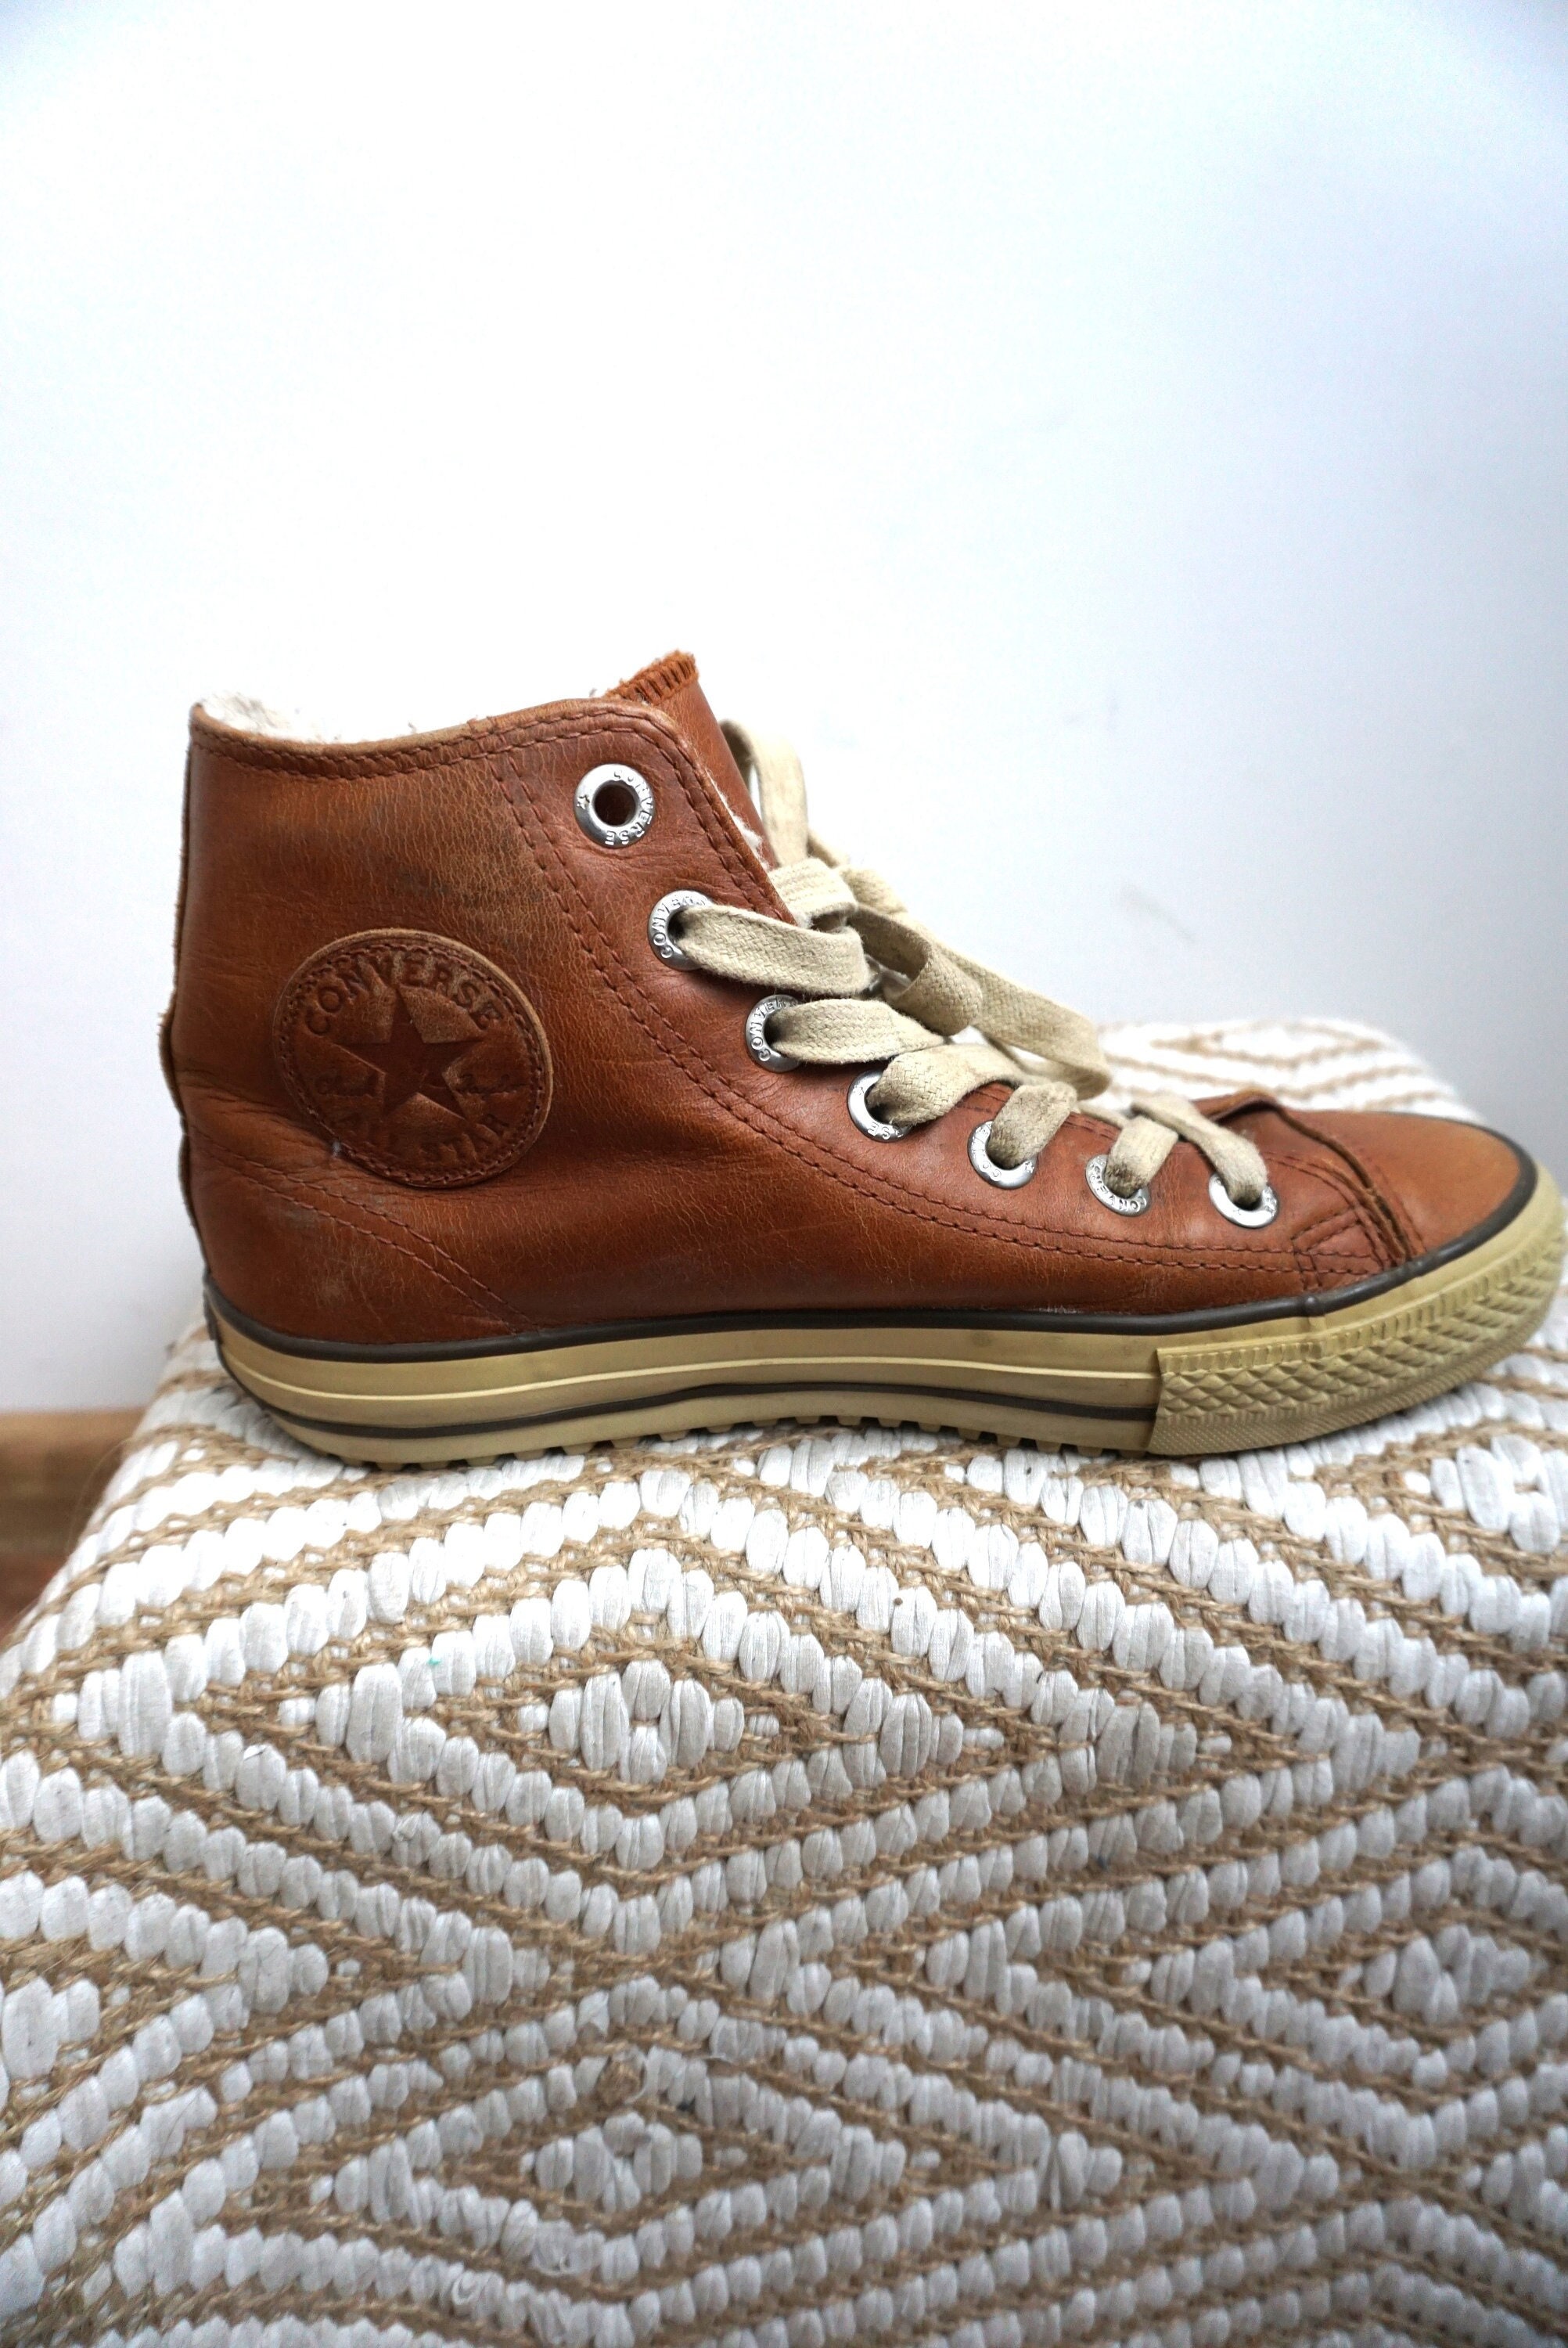 Vintage Converse Brown Genuine Leather Tie Sneakers Shoes Size 